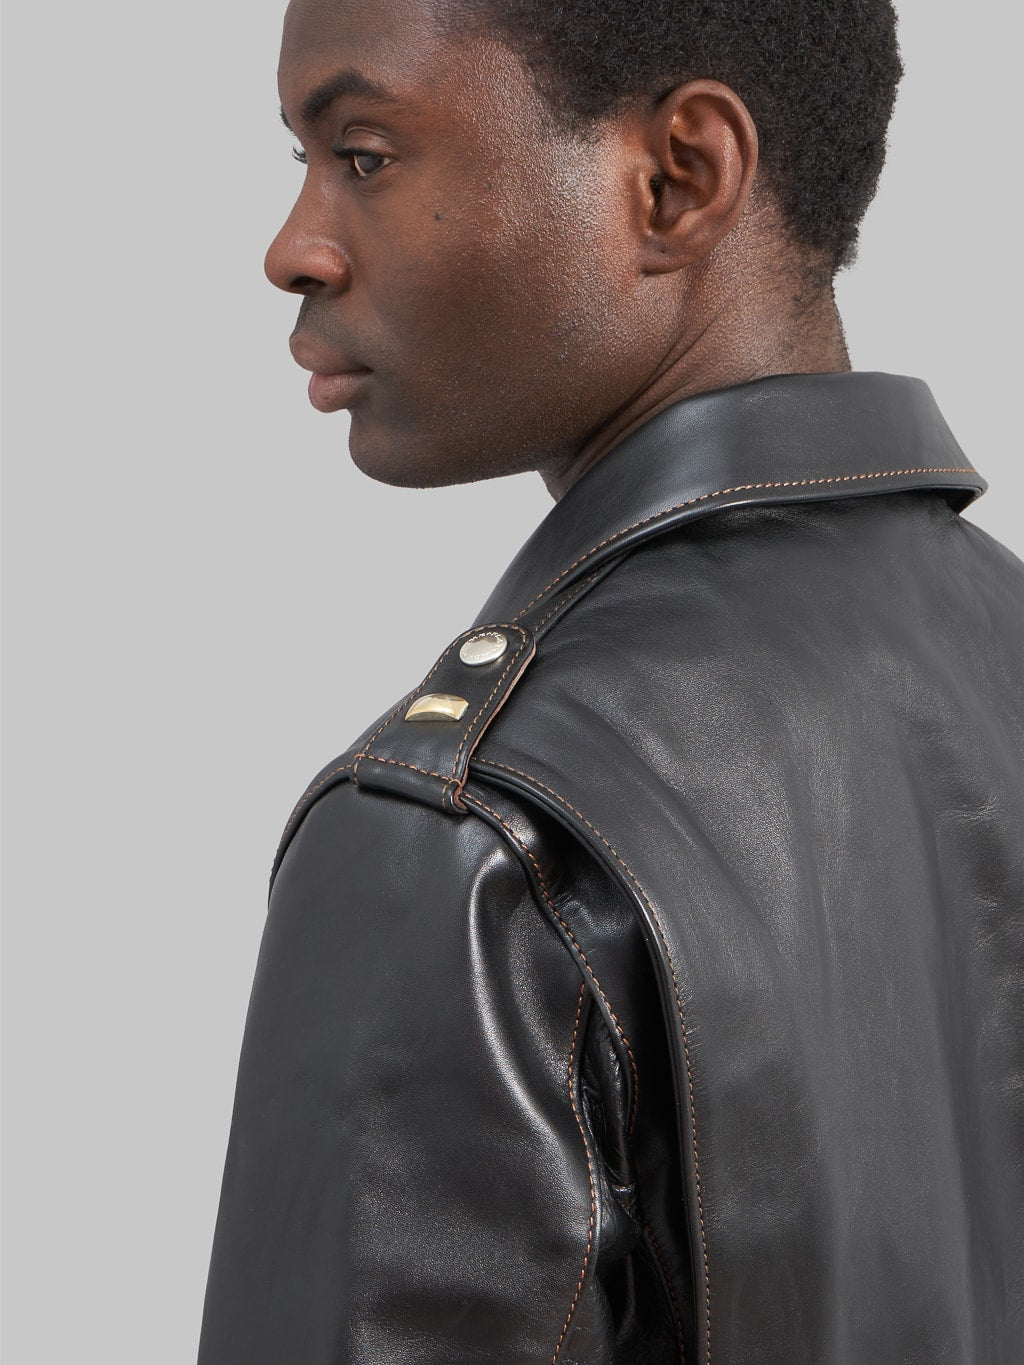 The Flat Head Horsehide leather double Riders Jacket Black Semi Aniline shoulder